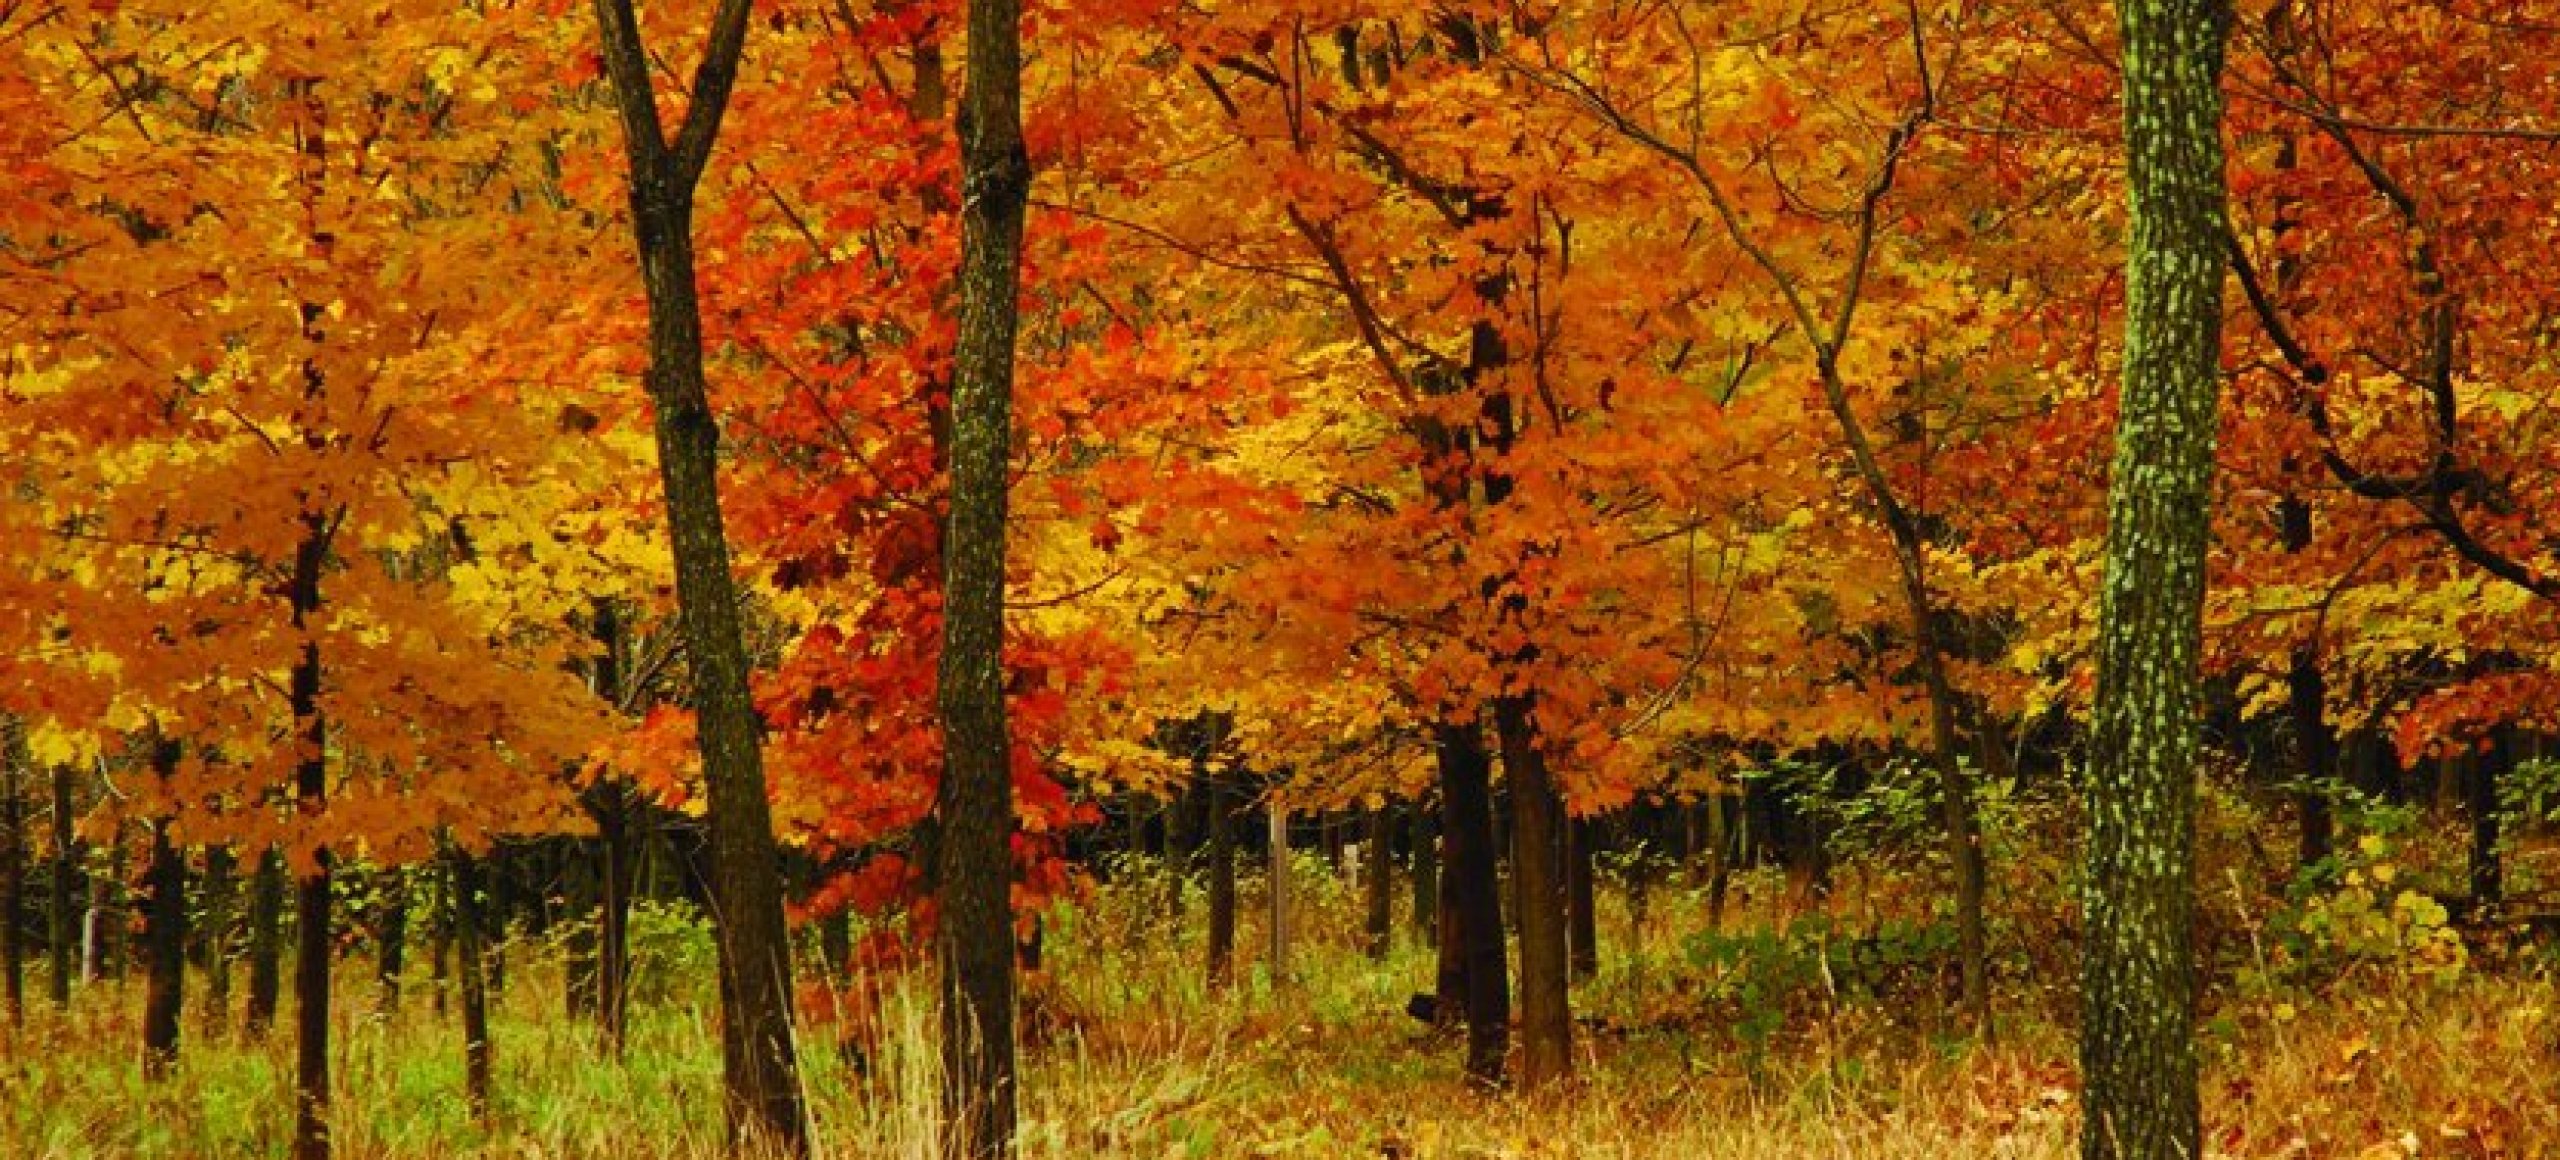 Autumn trees covered with orange leaves grow out of a yellow meadow.